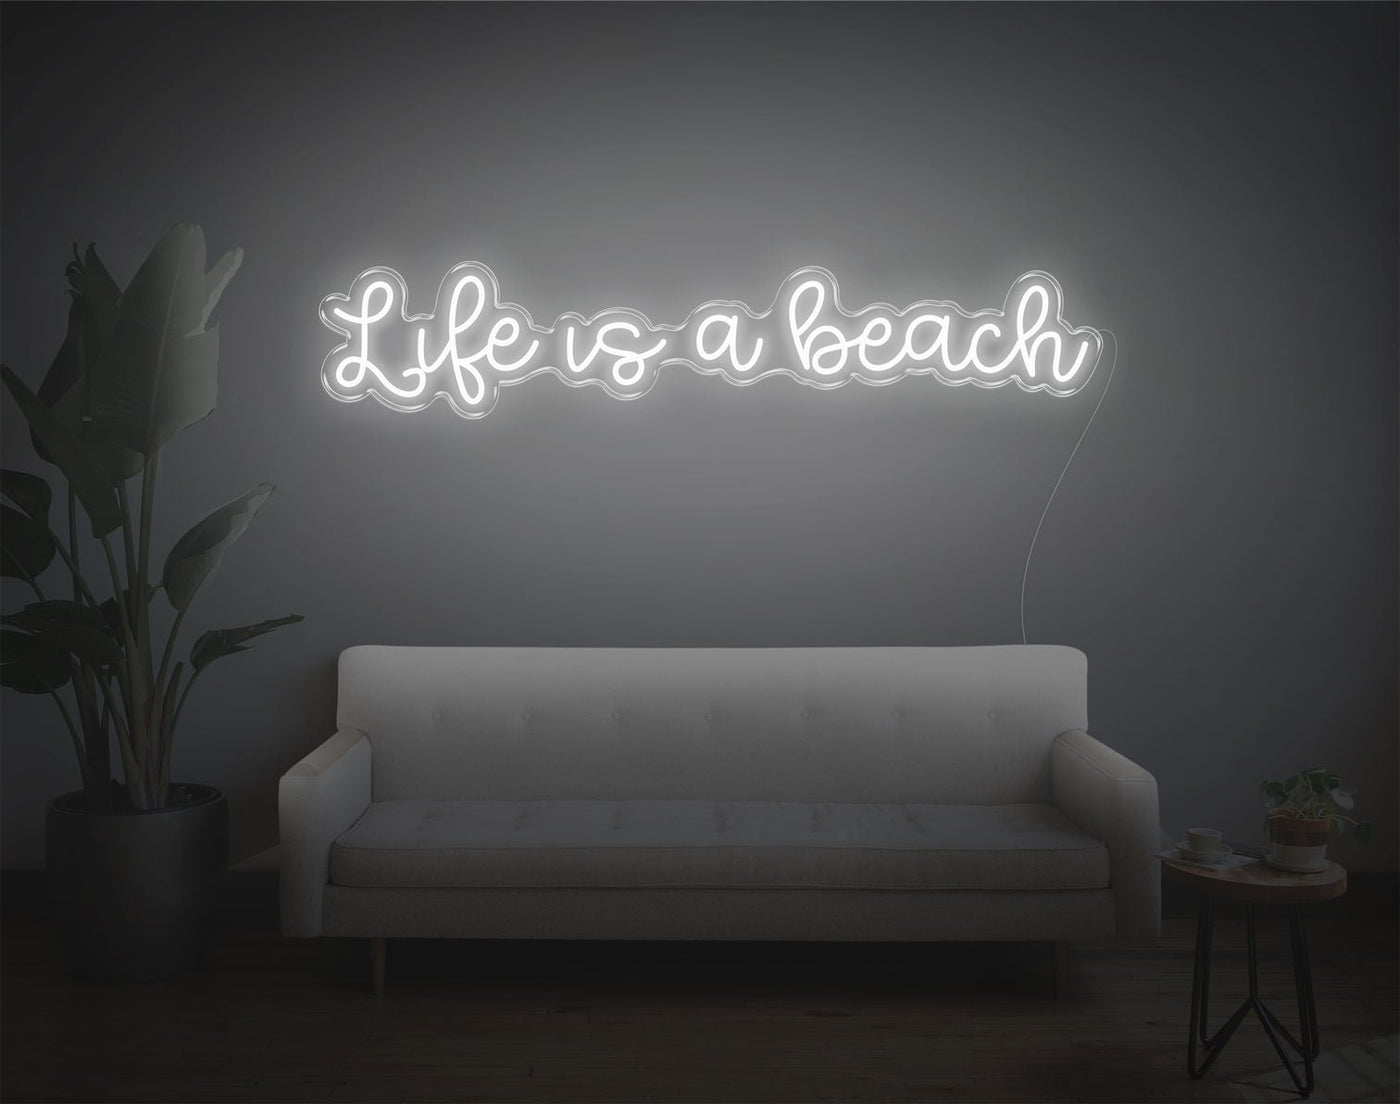 Life is a beach LED Neon Sign - 28inch x 7inchHot Pink